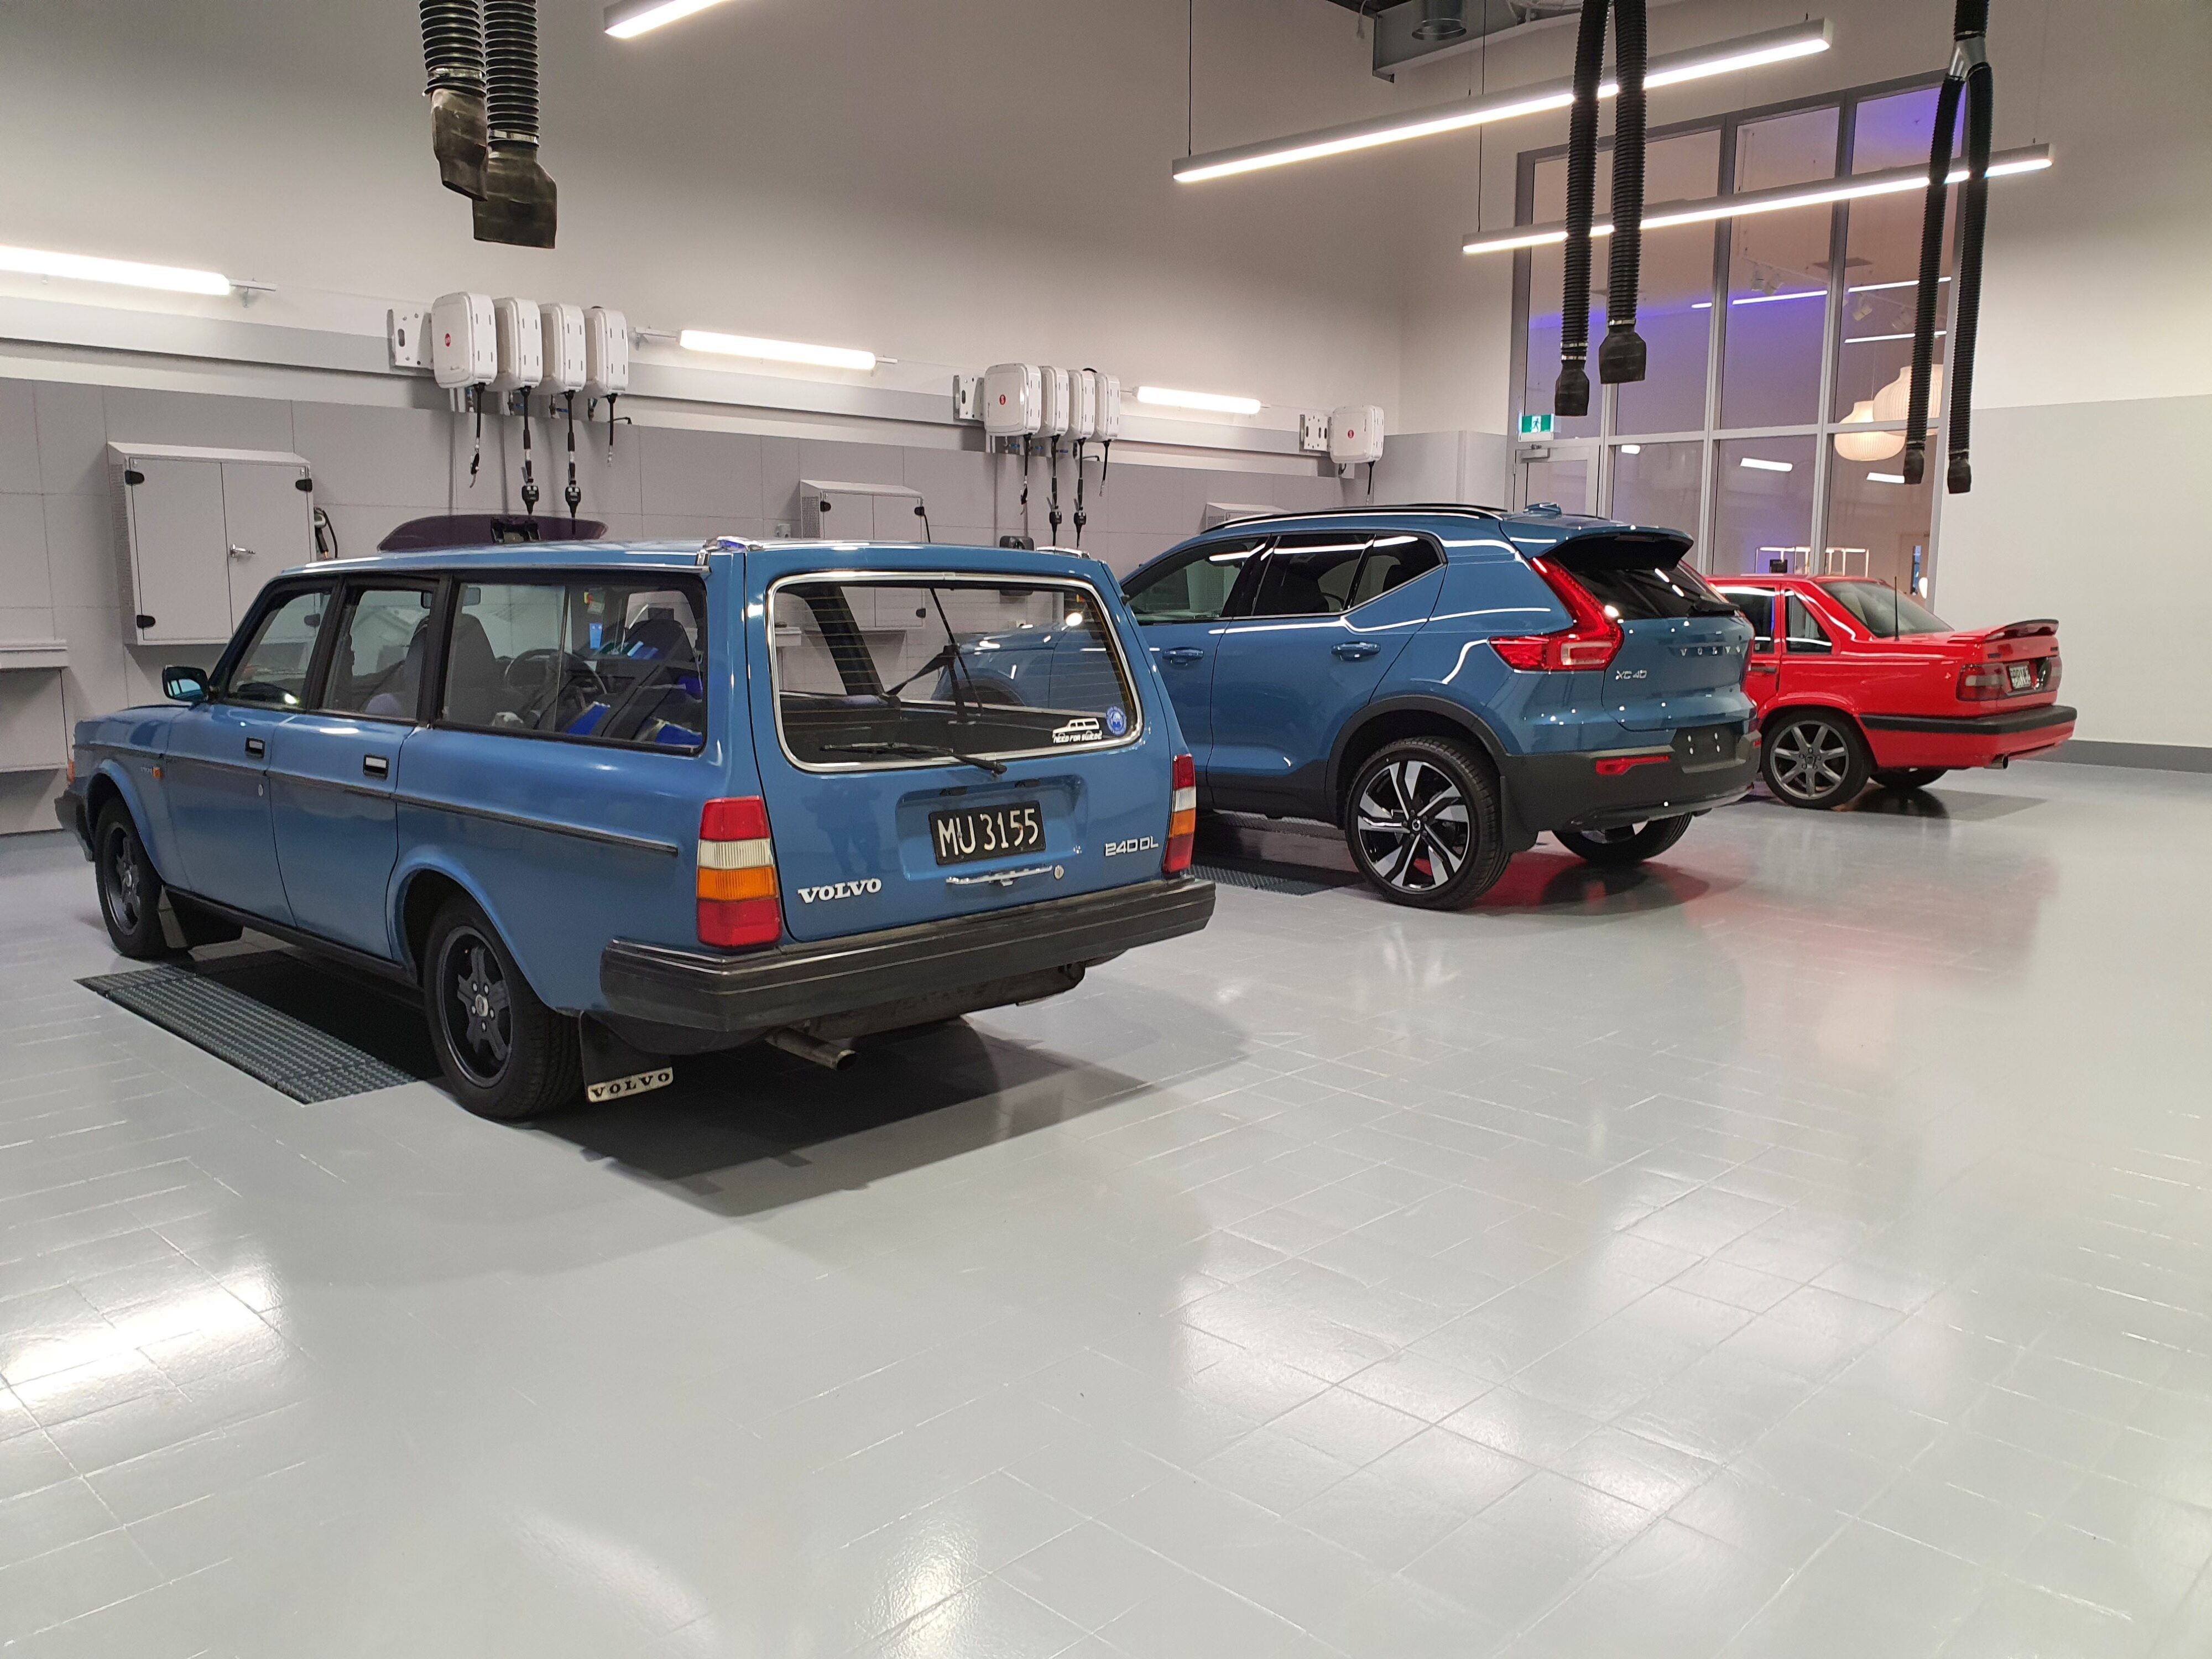 Three Volvo cars present in the workshop of the showroom. From left, a 246GL in Fjord Blue, a XC40 in Fjord Blue and an 850 T5R sedan in Red.